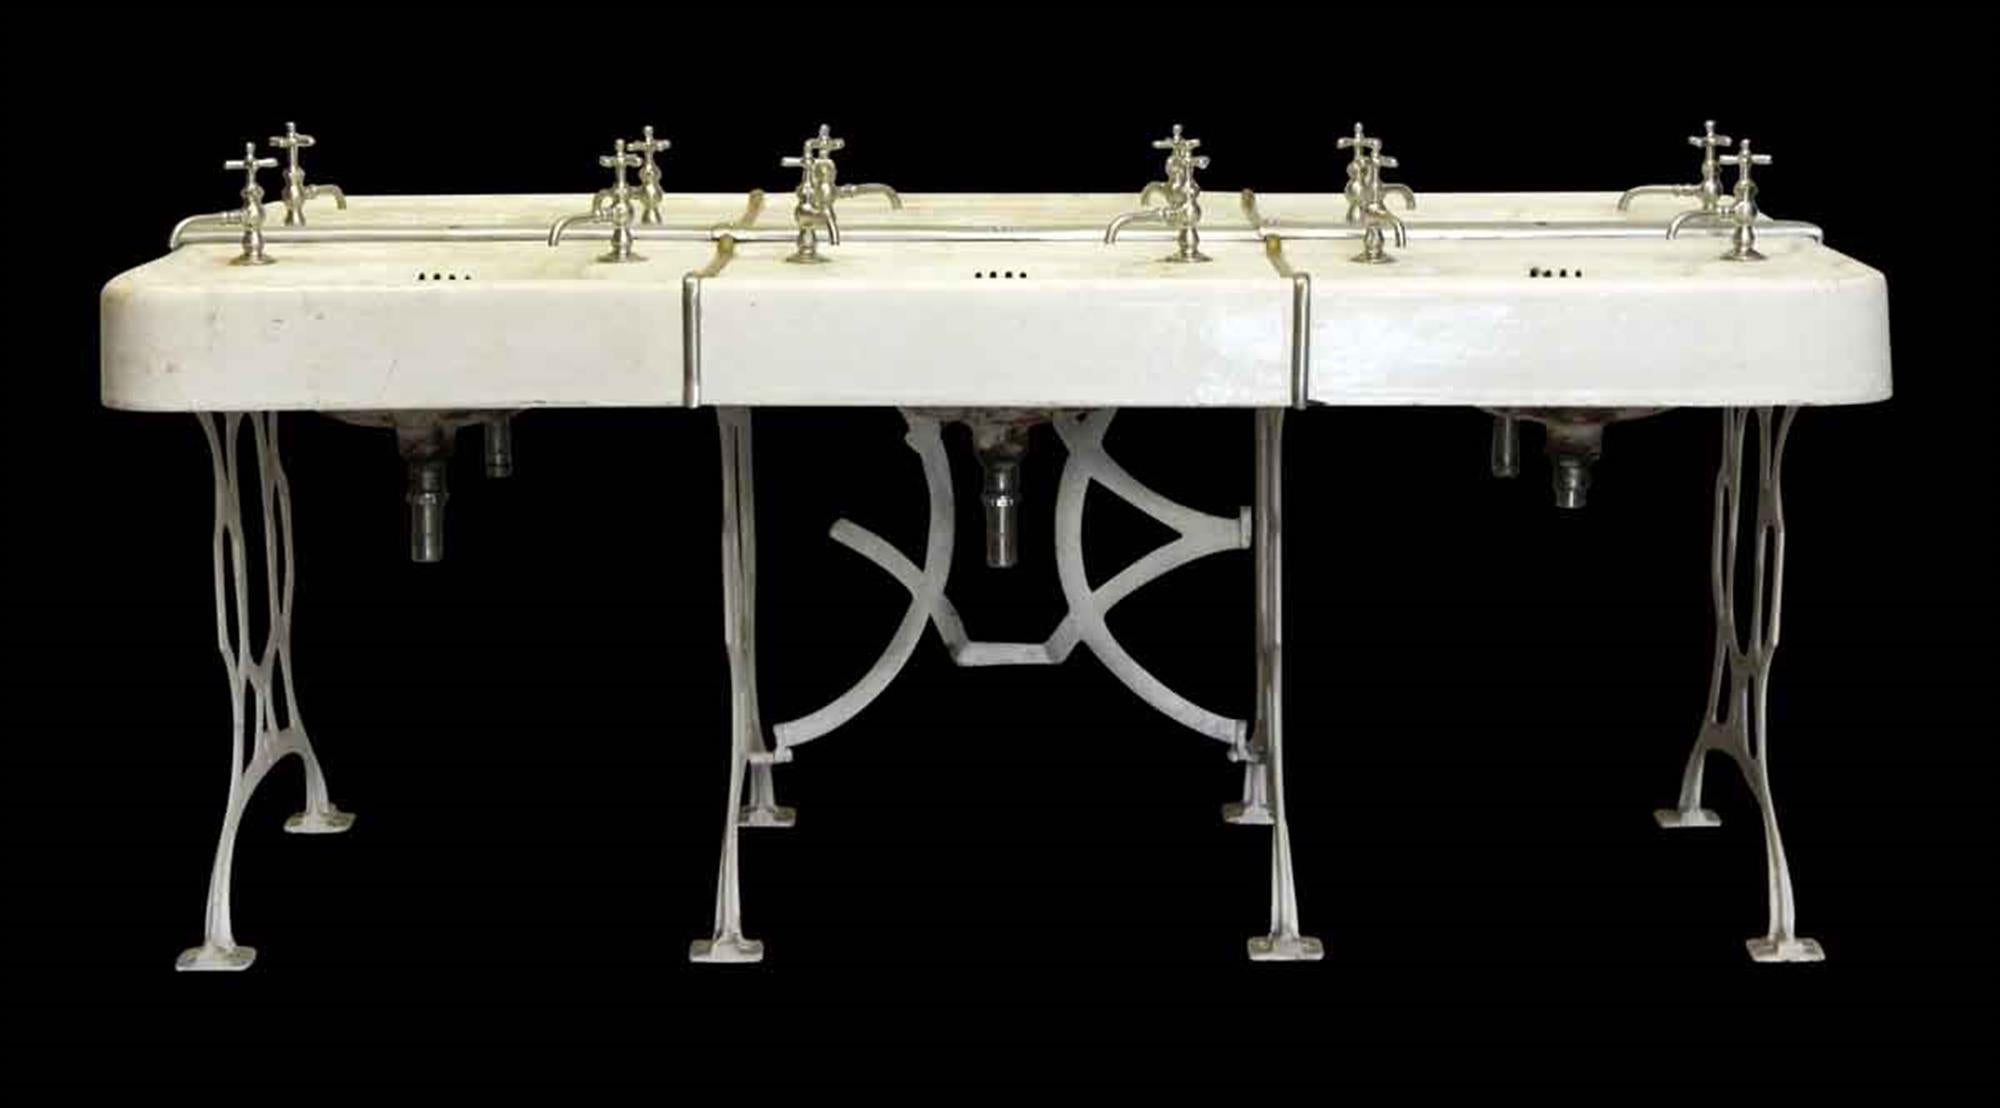 This is an original old 1910 set of bathroom school sinks ganged together with decorative cabriolet white cast iron legs. Some replica hardware is included. This can be seen at our 400 Gilligan St location in Scranton, PA.